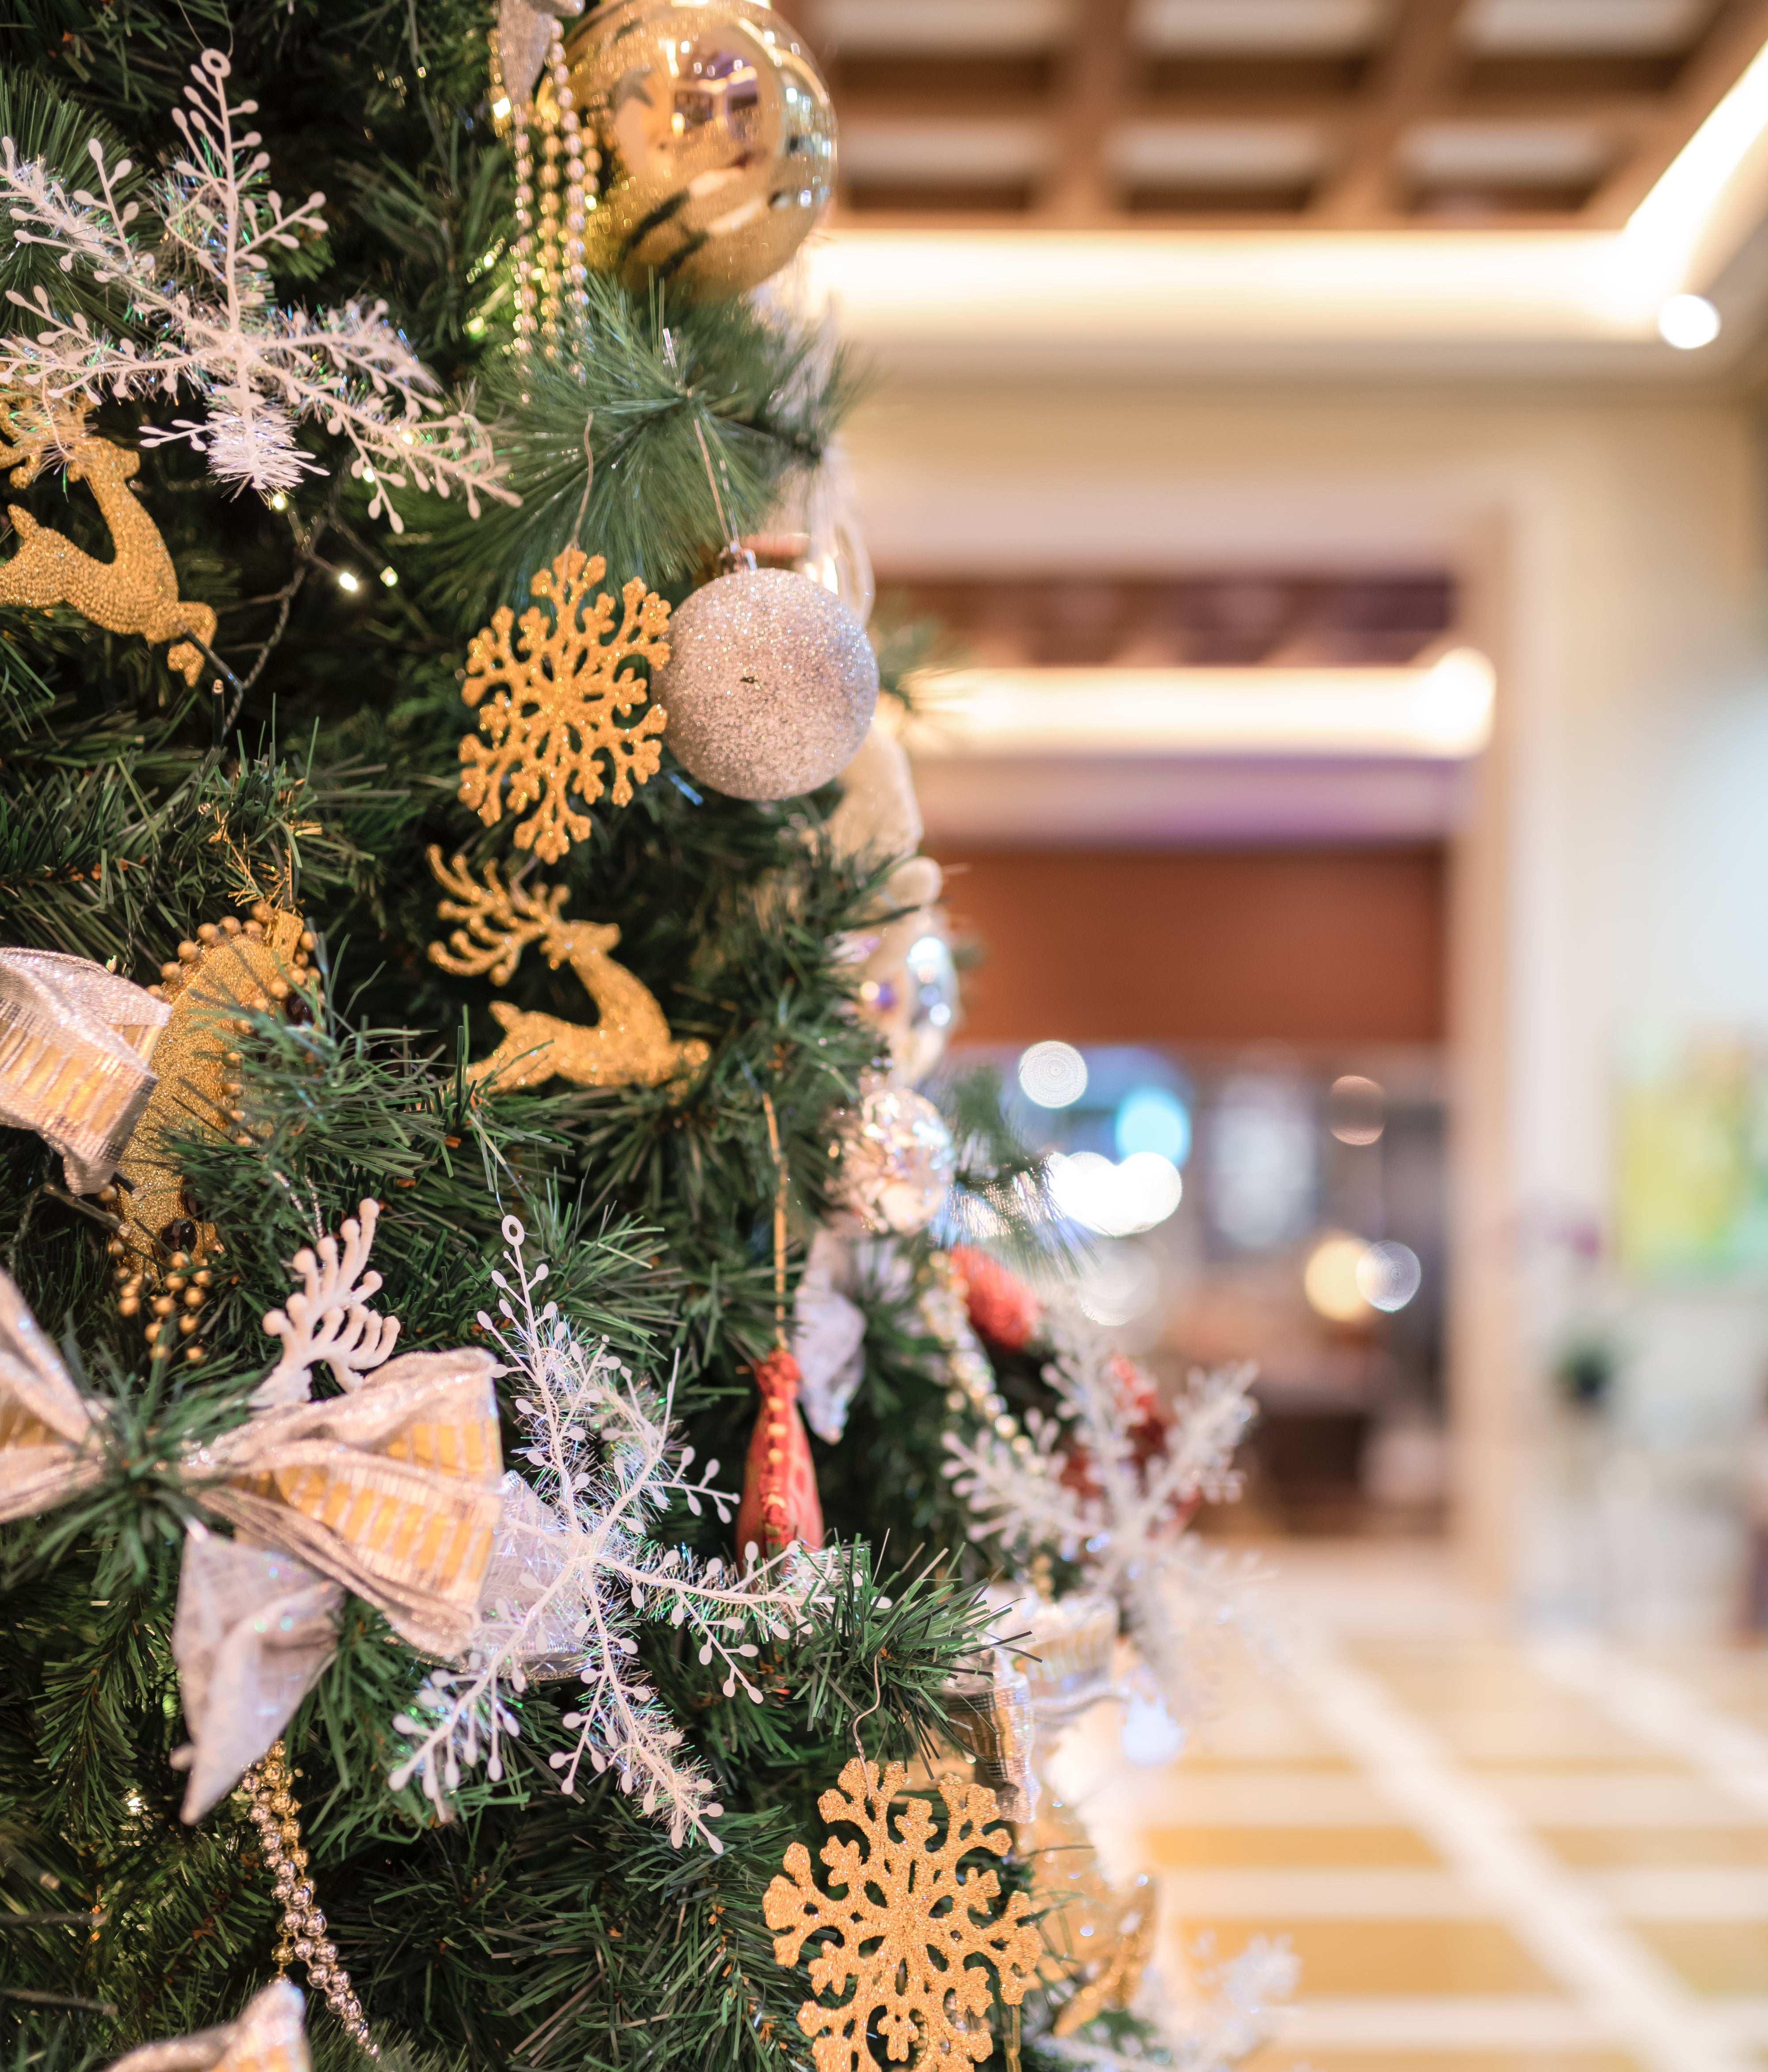 Decorated Christmas tree in a lobby